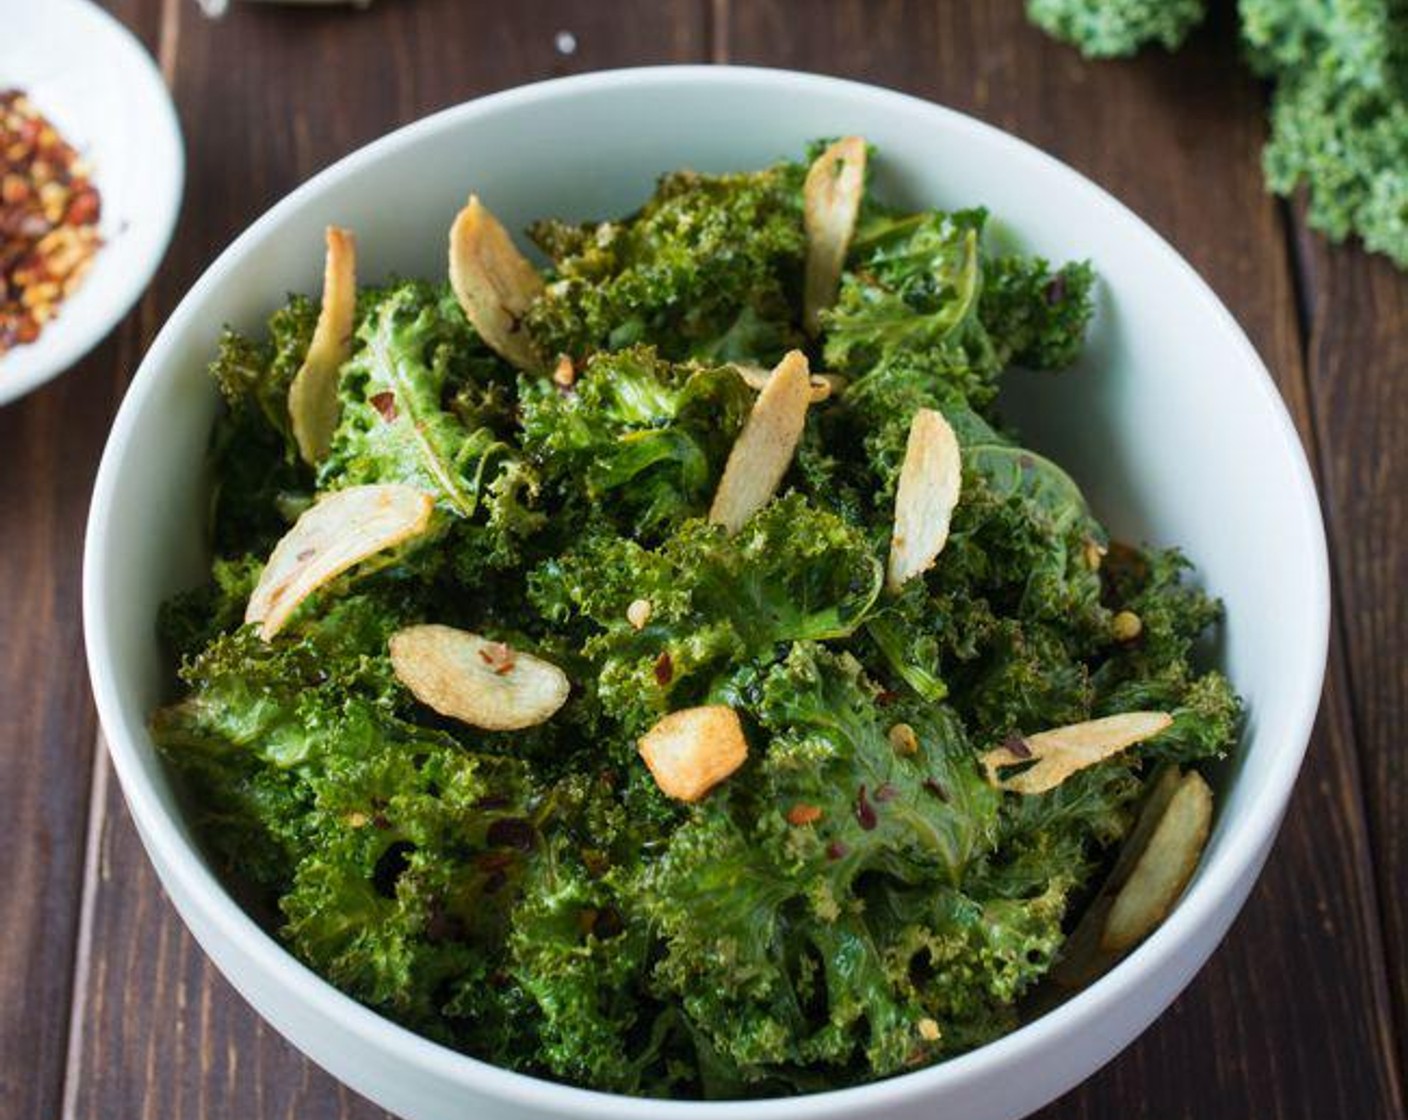 step 6 Bake for 18 to 20 minutes or until crispy. Transfer the kale chips to a bowl, then top with the garlic chips and more crushed red pepper, if desired.